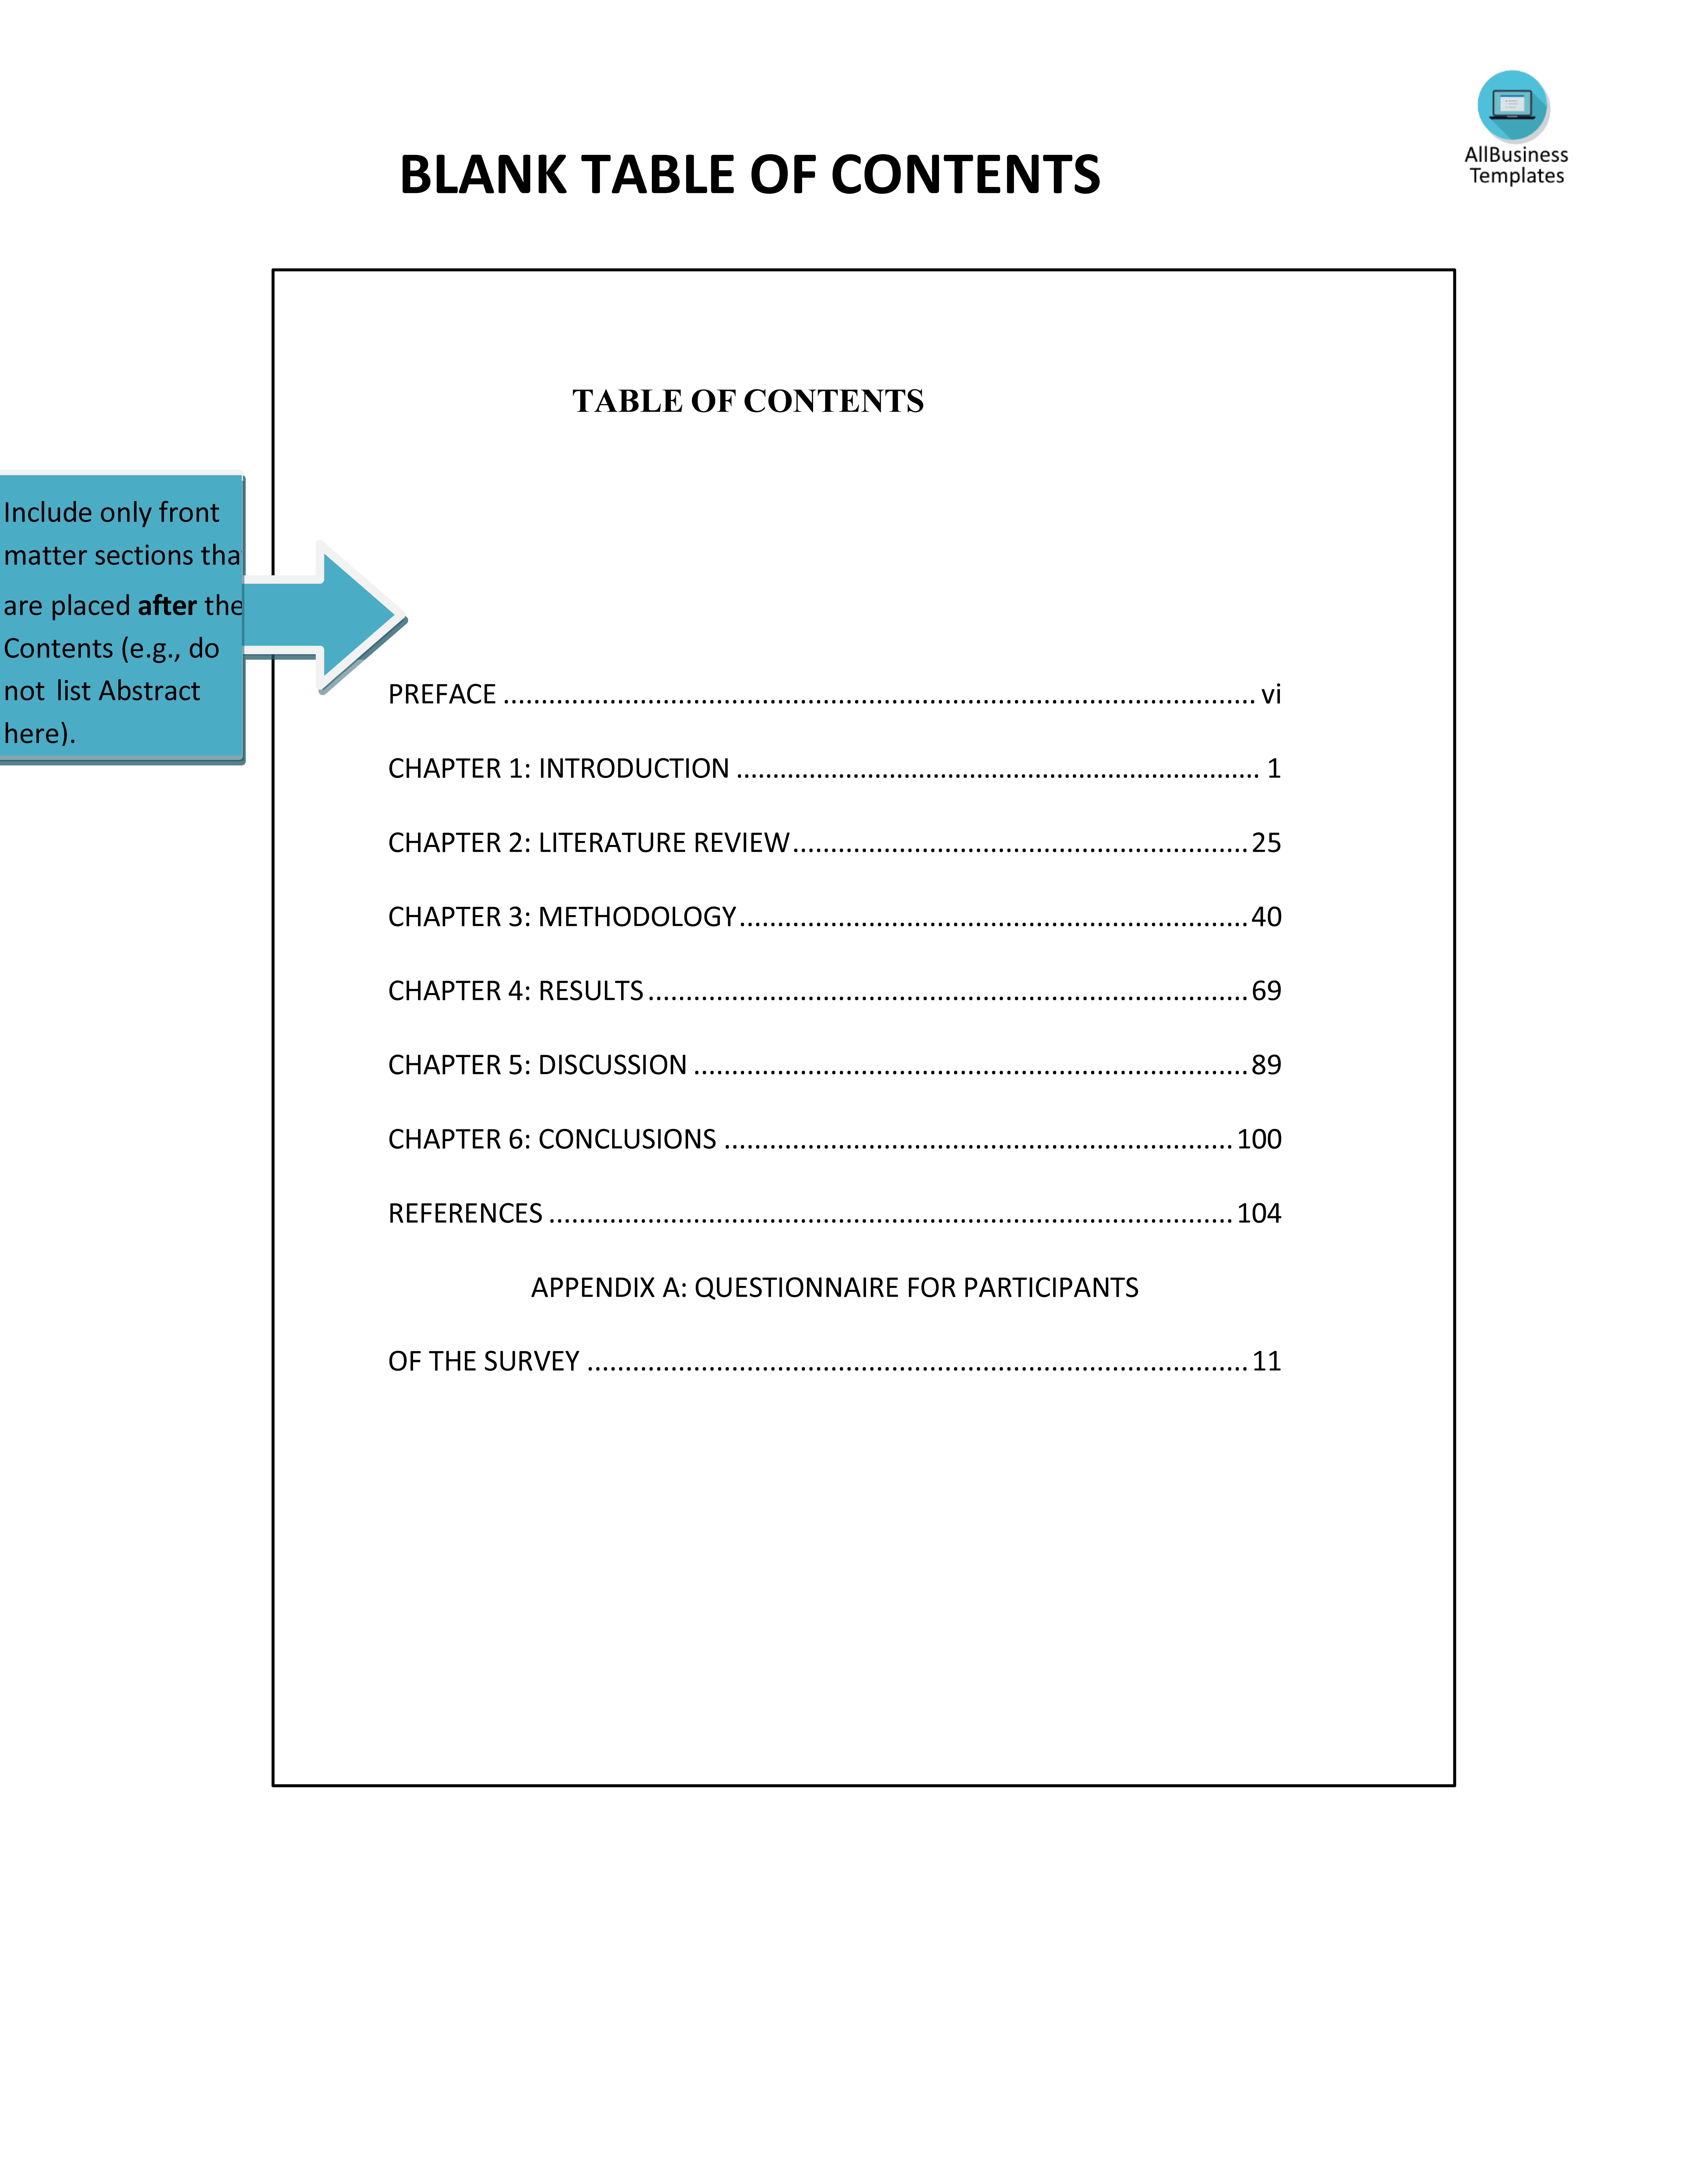 Blank Table of Contents Template main image